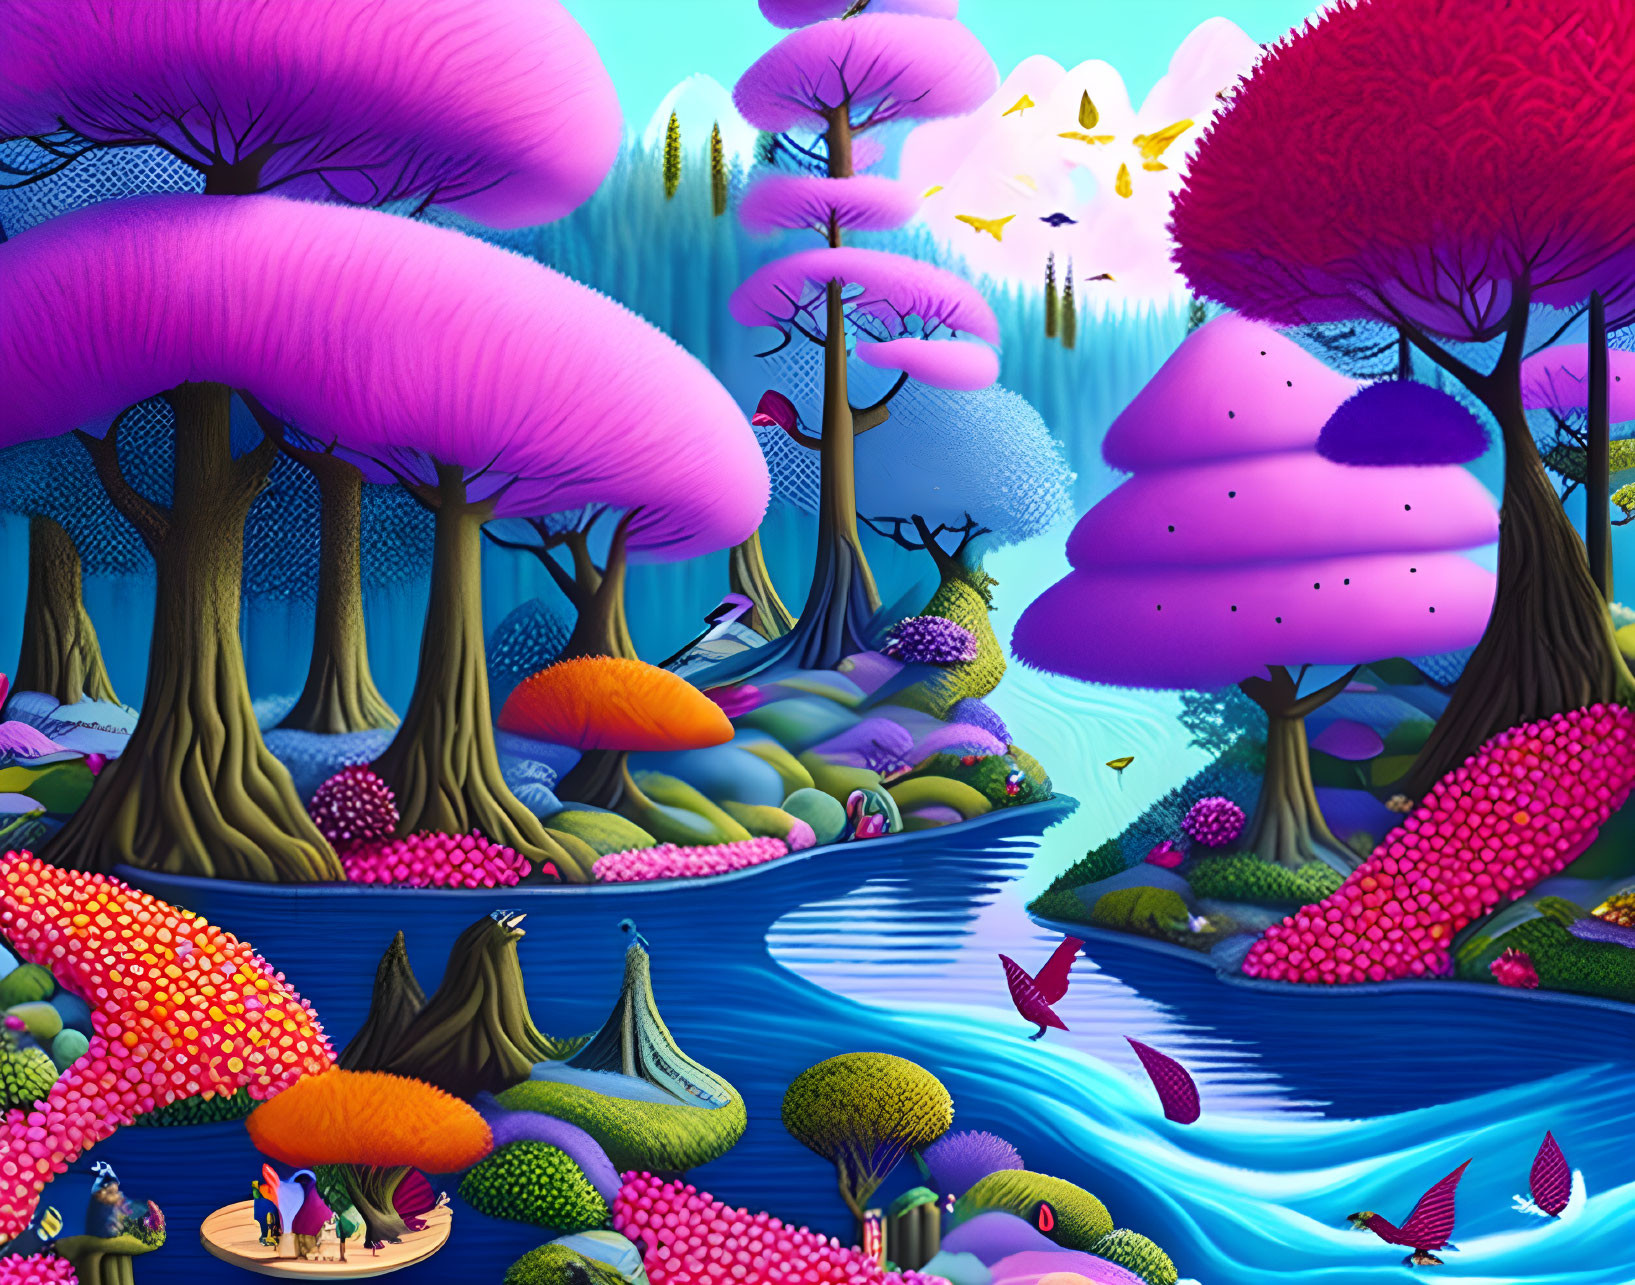 Colorful fantasy landscape with pink and purple trees, crystal blue rivers, and whimsical birds.